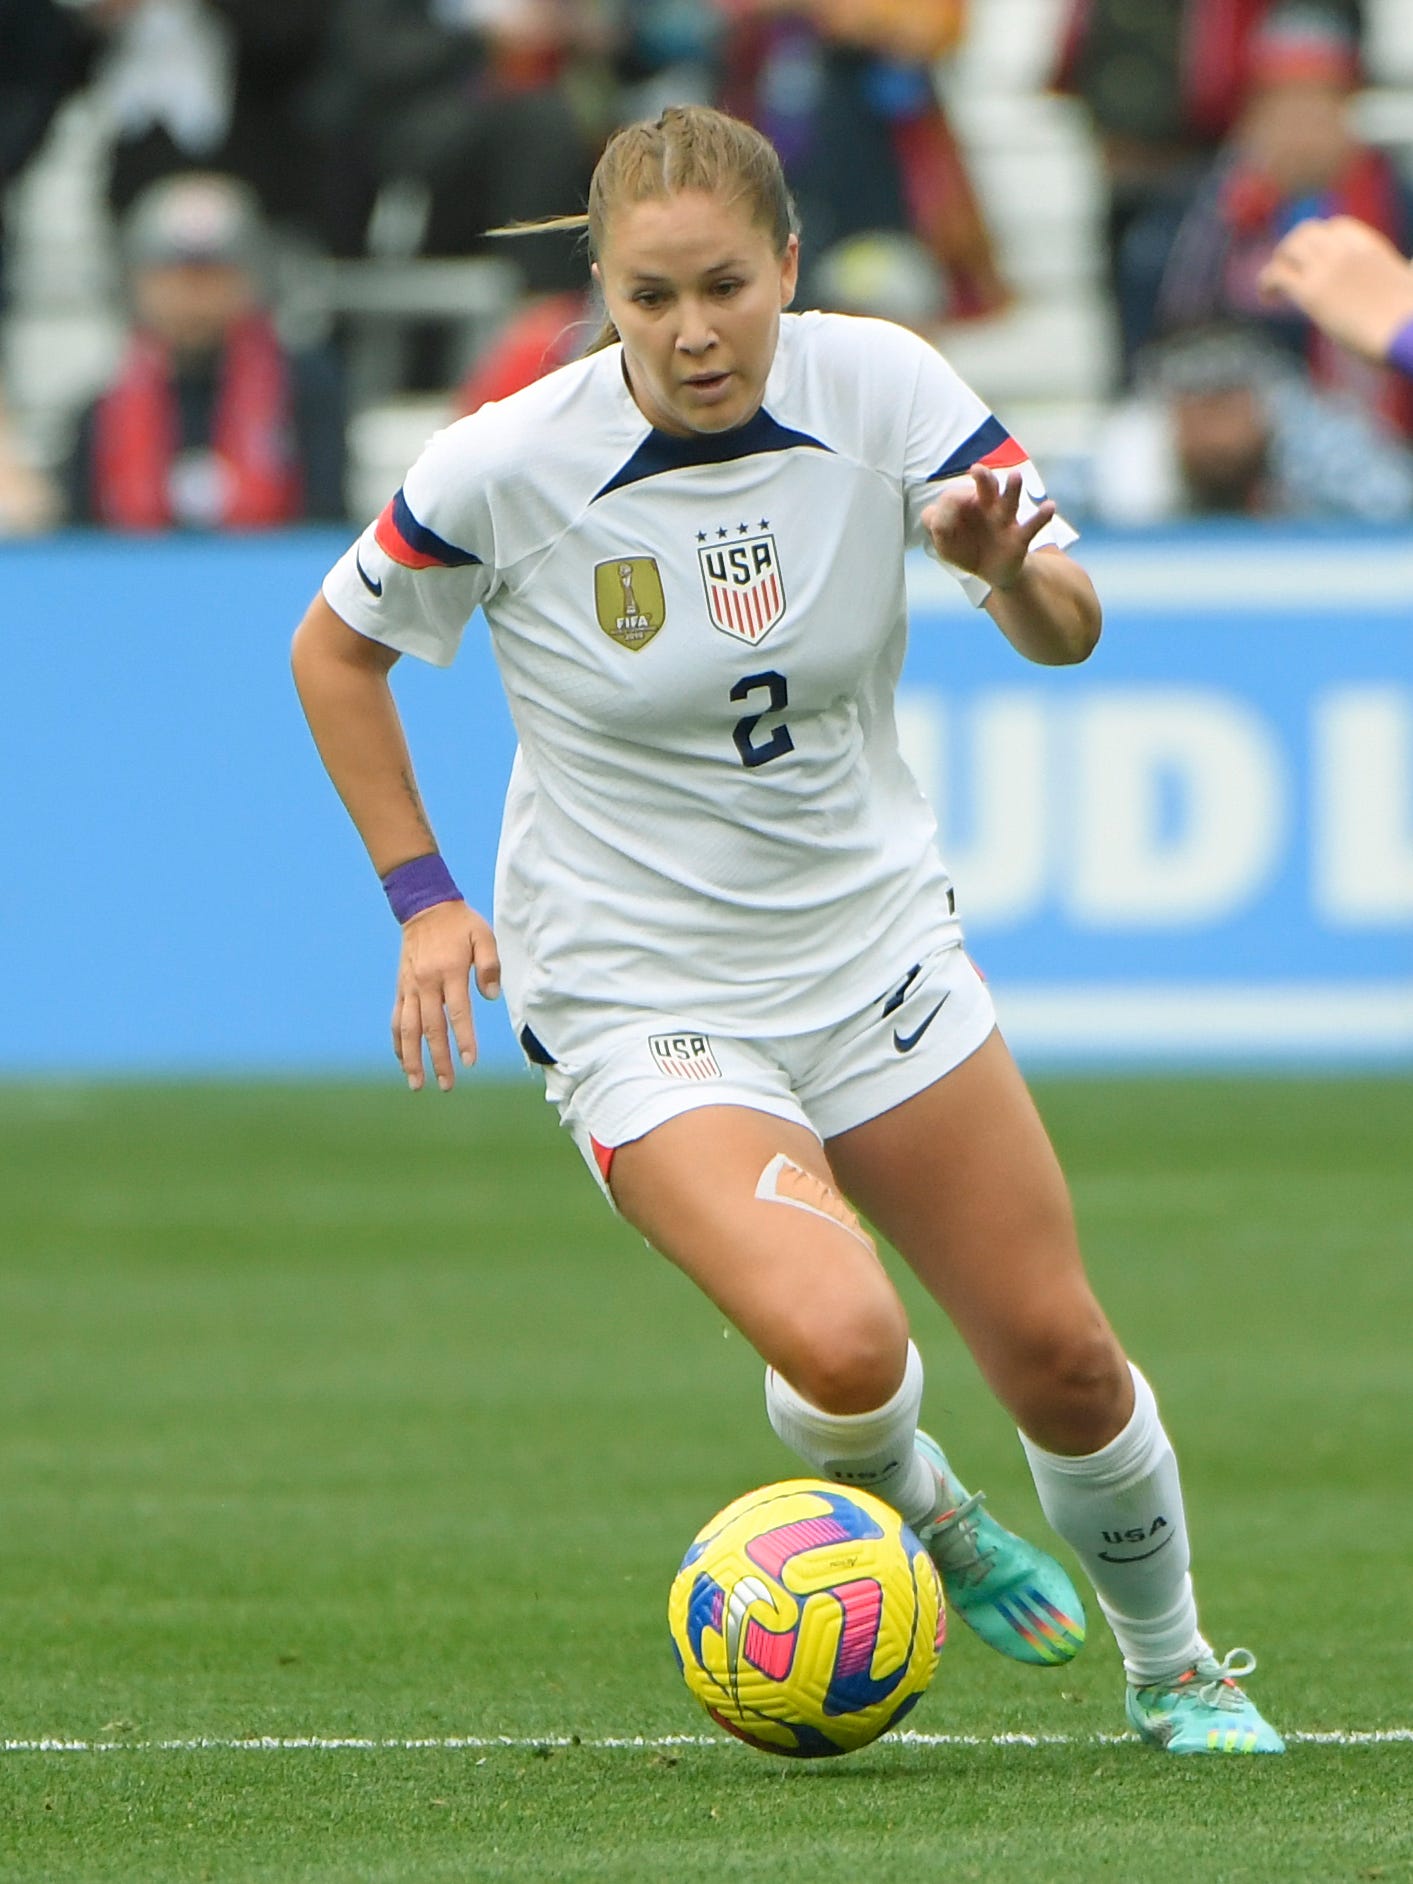 An action image of Ashley Sanchez playing soccer.